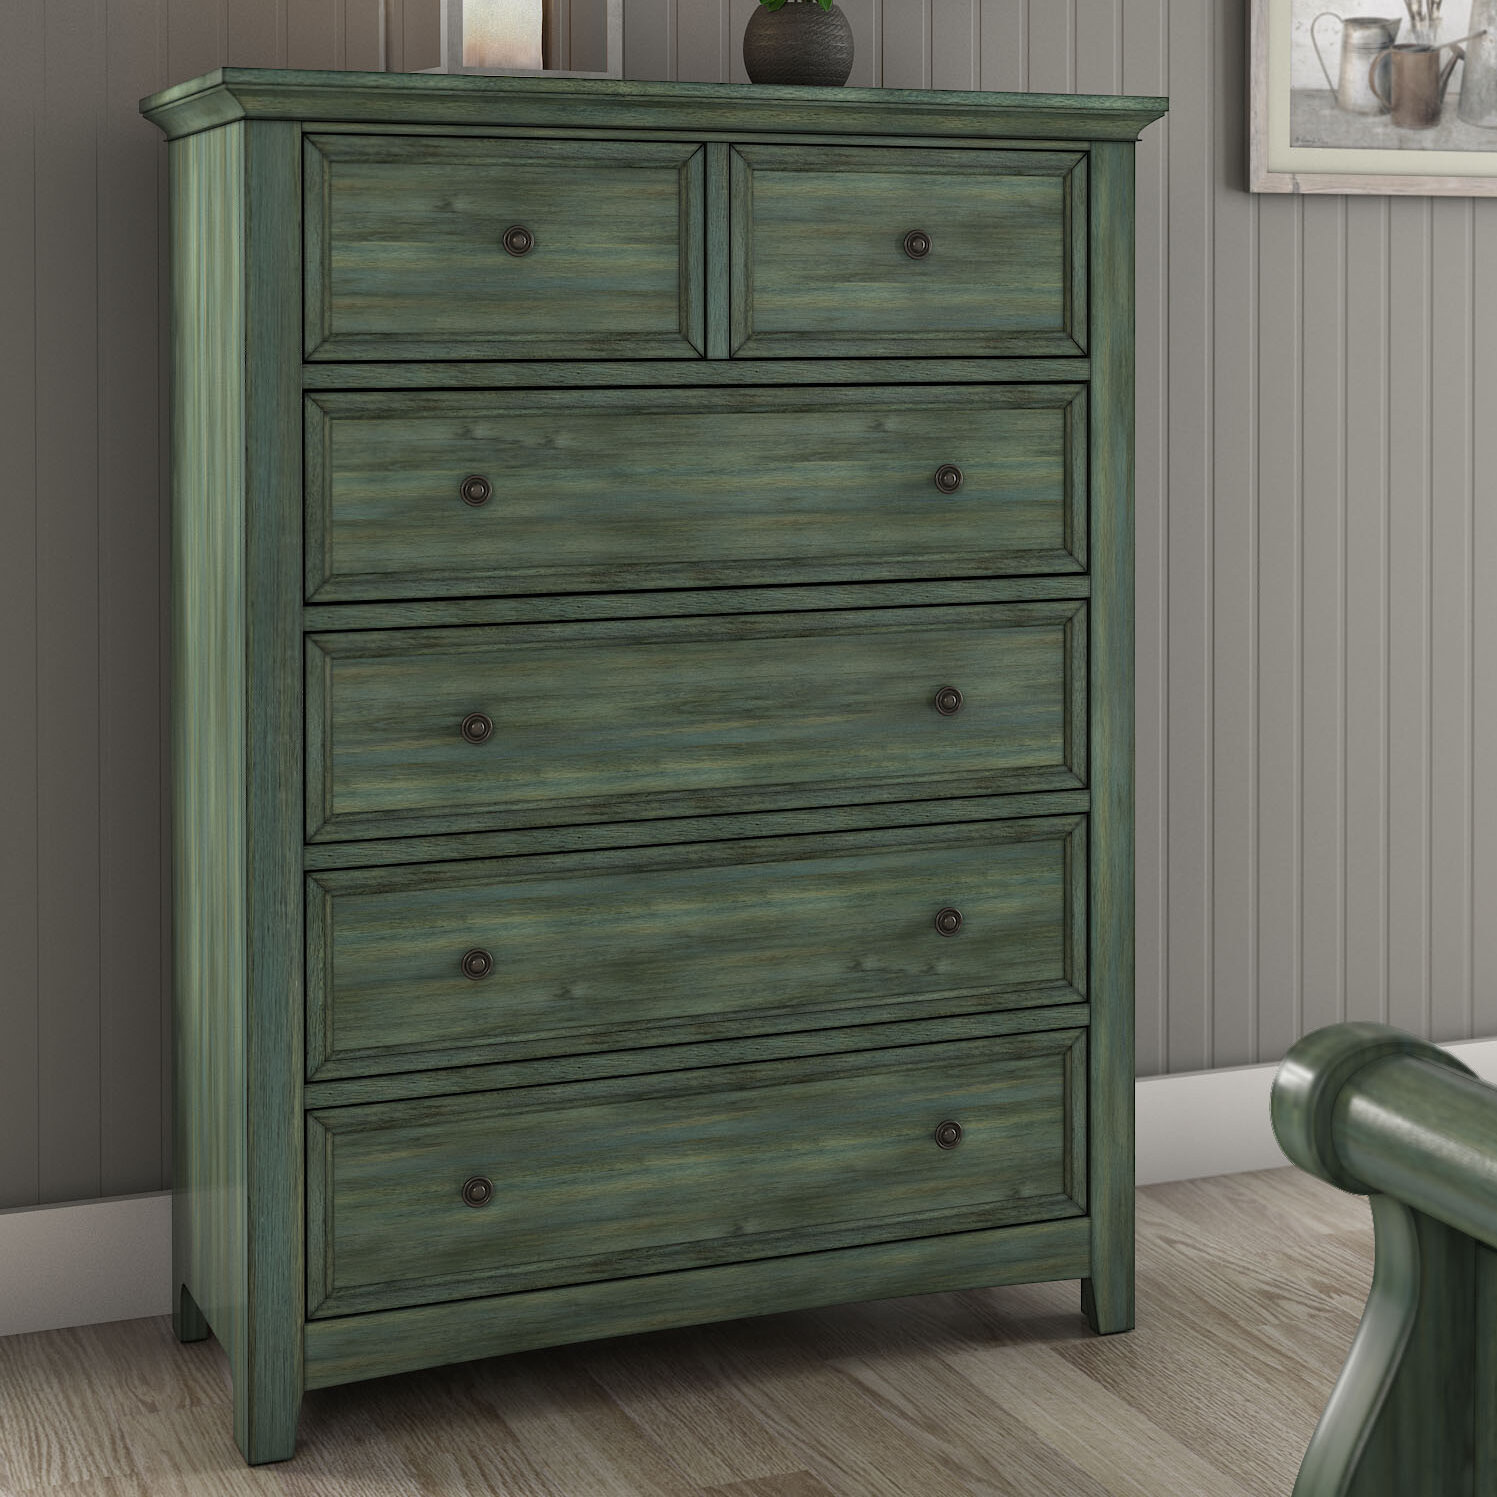 Green Dressers Up To 80 Off This Week Only Wayfair